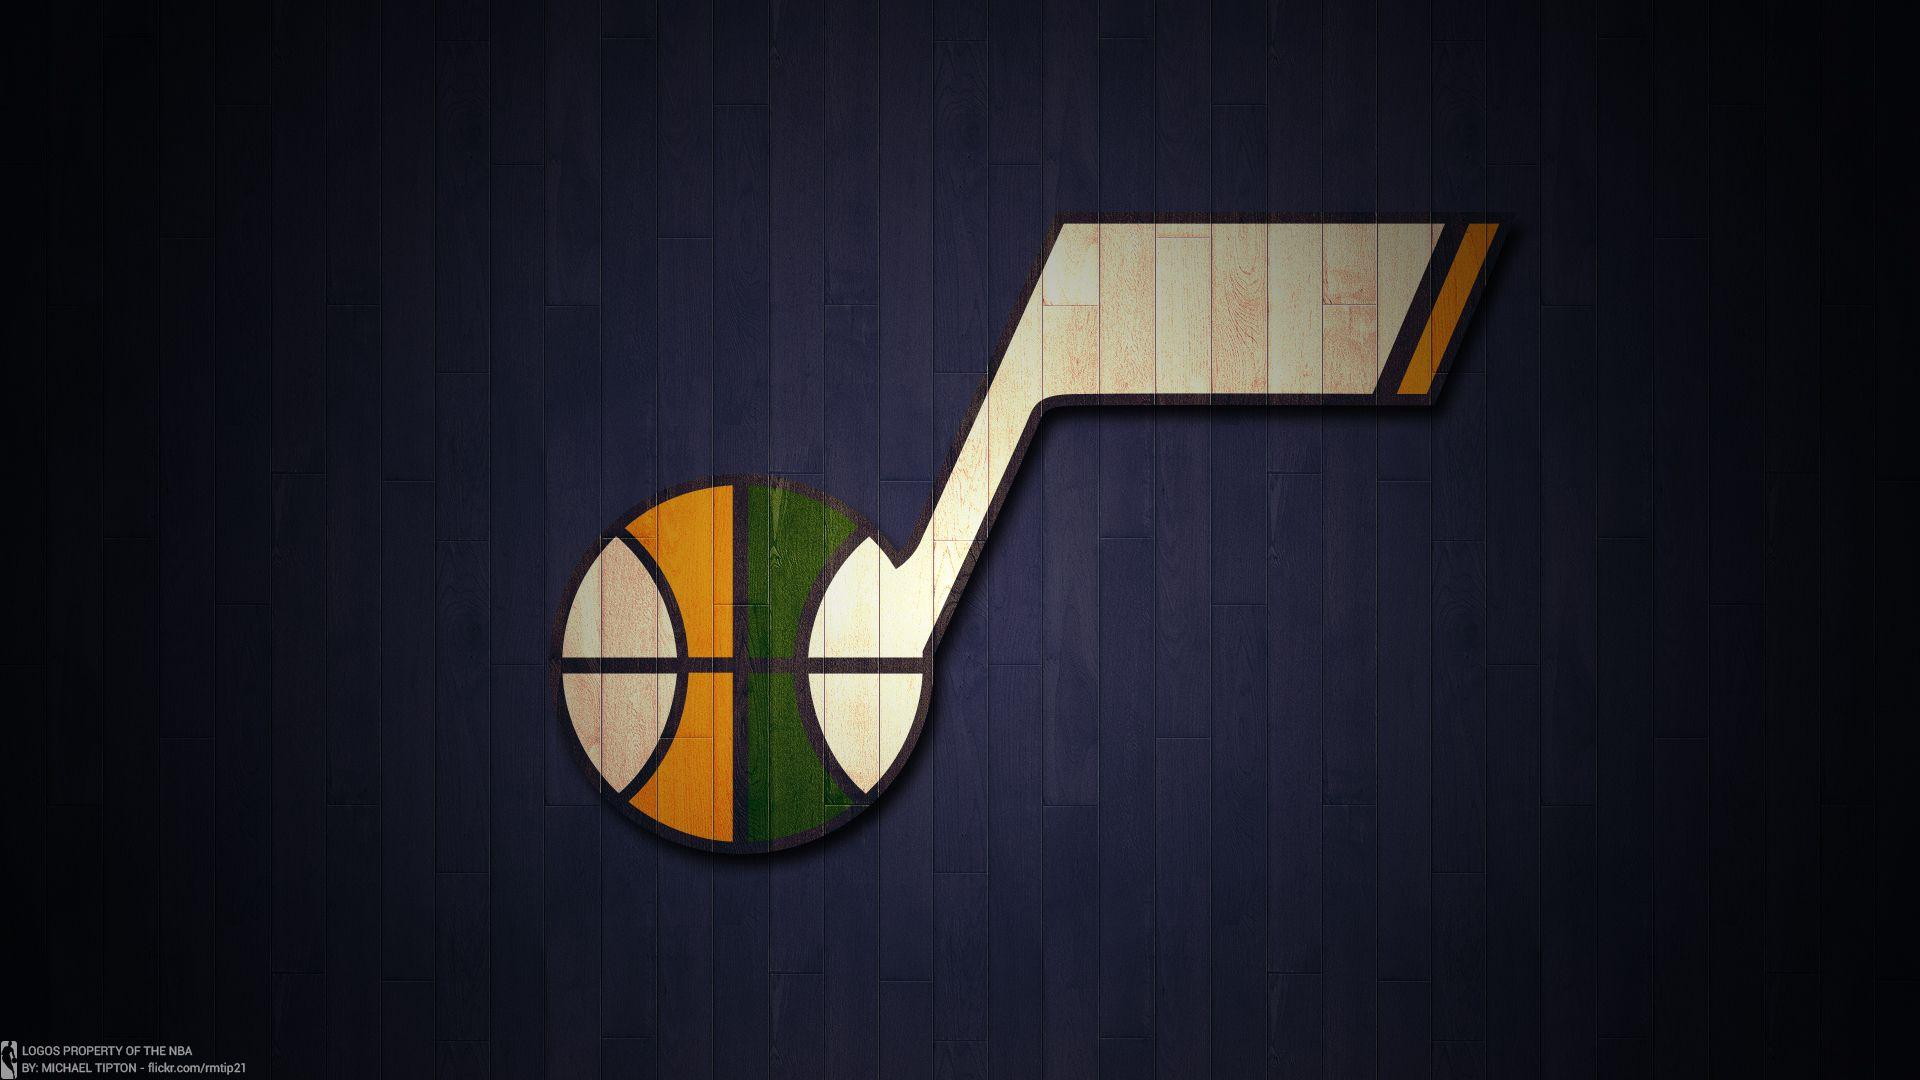 Utah Jazz For Desktop Wallpaper with high-resolution 1920x1080 pixel. You can use this wallpaper for your Desktop Computer Backgrounds, Windows or Mac Screensavers, iPhone Lock screen, Tablet or Android and another Mobile Phone device